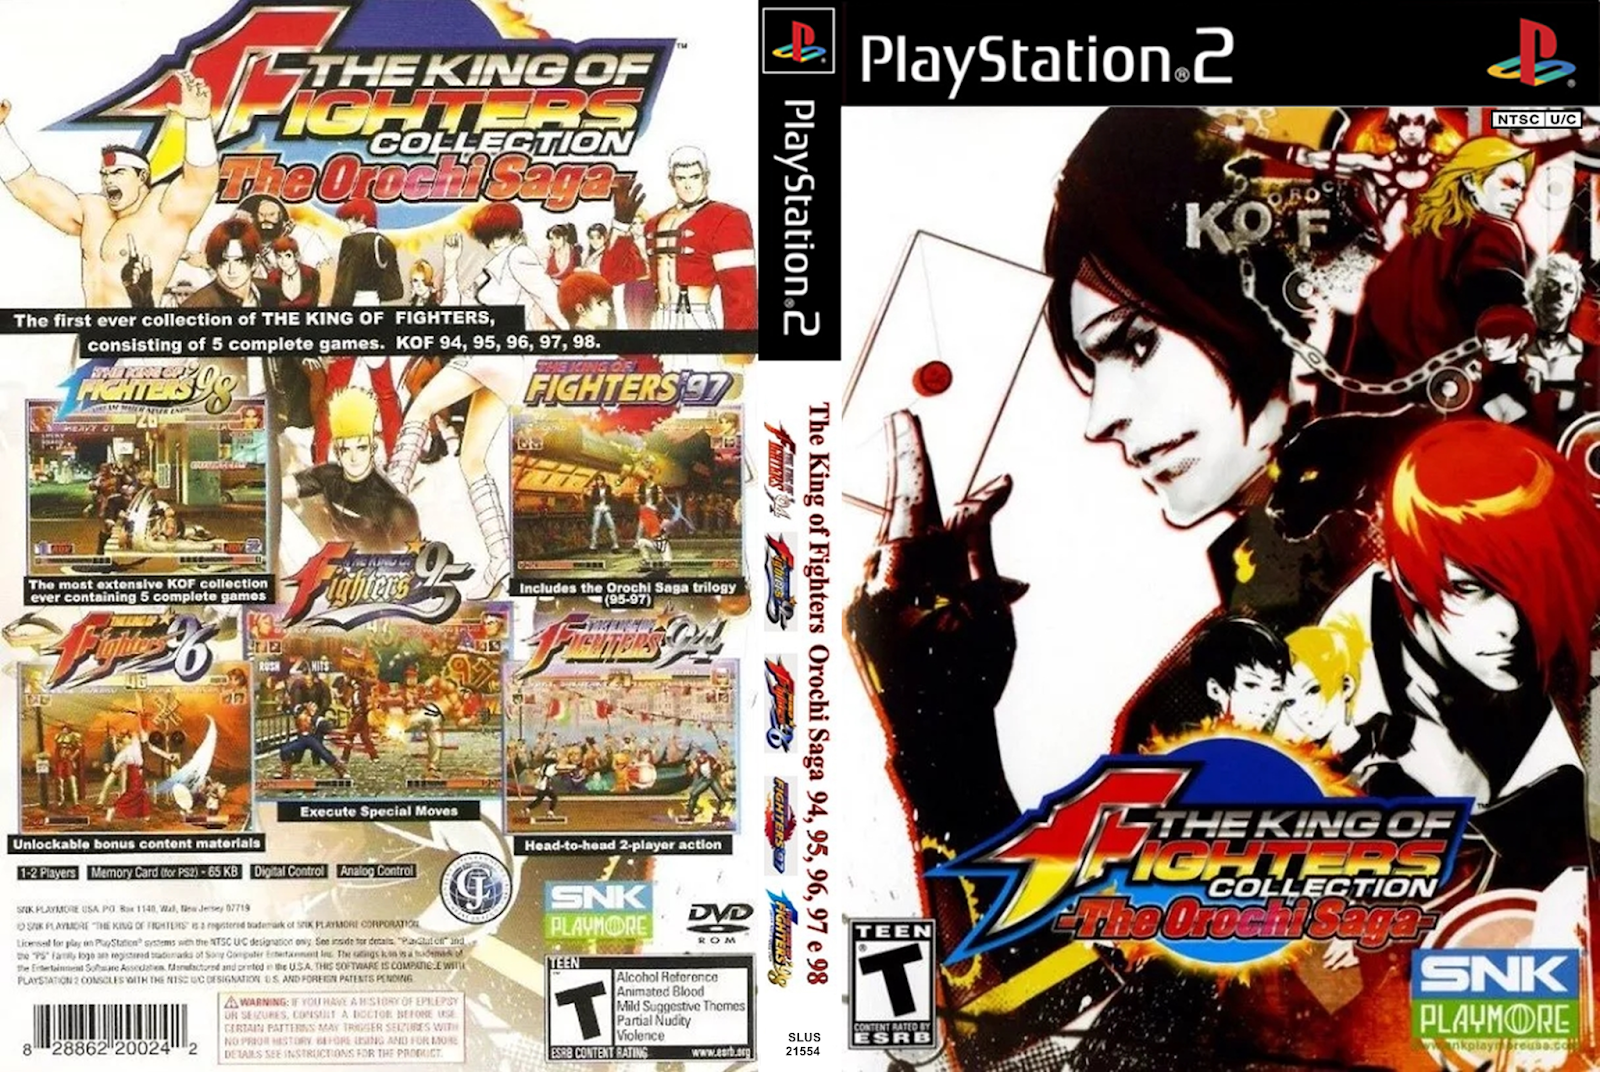 Collection ps2. The King of Fighters collection: the Orochi Saga. King of Fighters 96 ps1 обложка. King of Fighters collection - the Orochi Saga, the PSP. KOF 2 ps2.